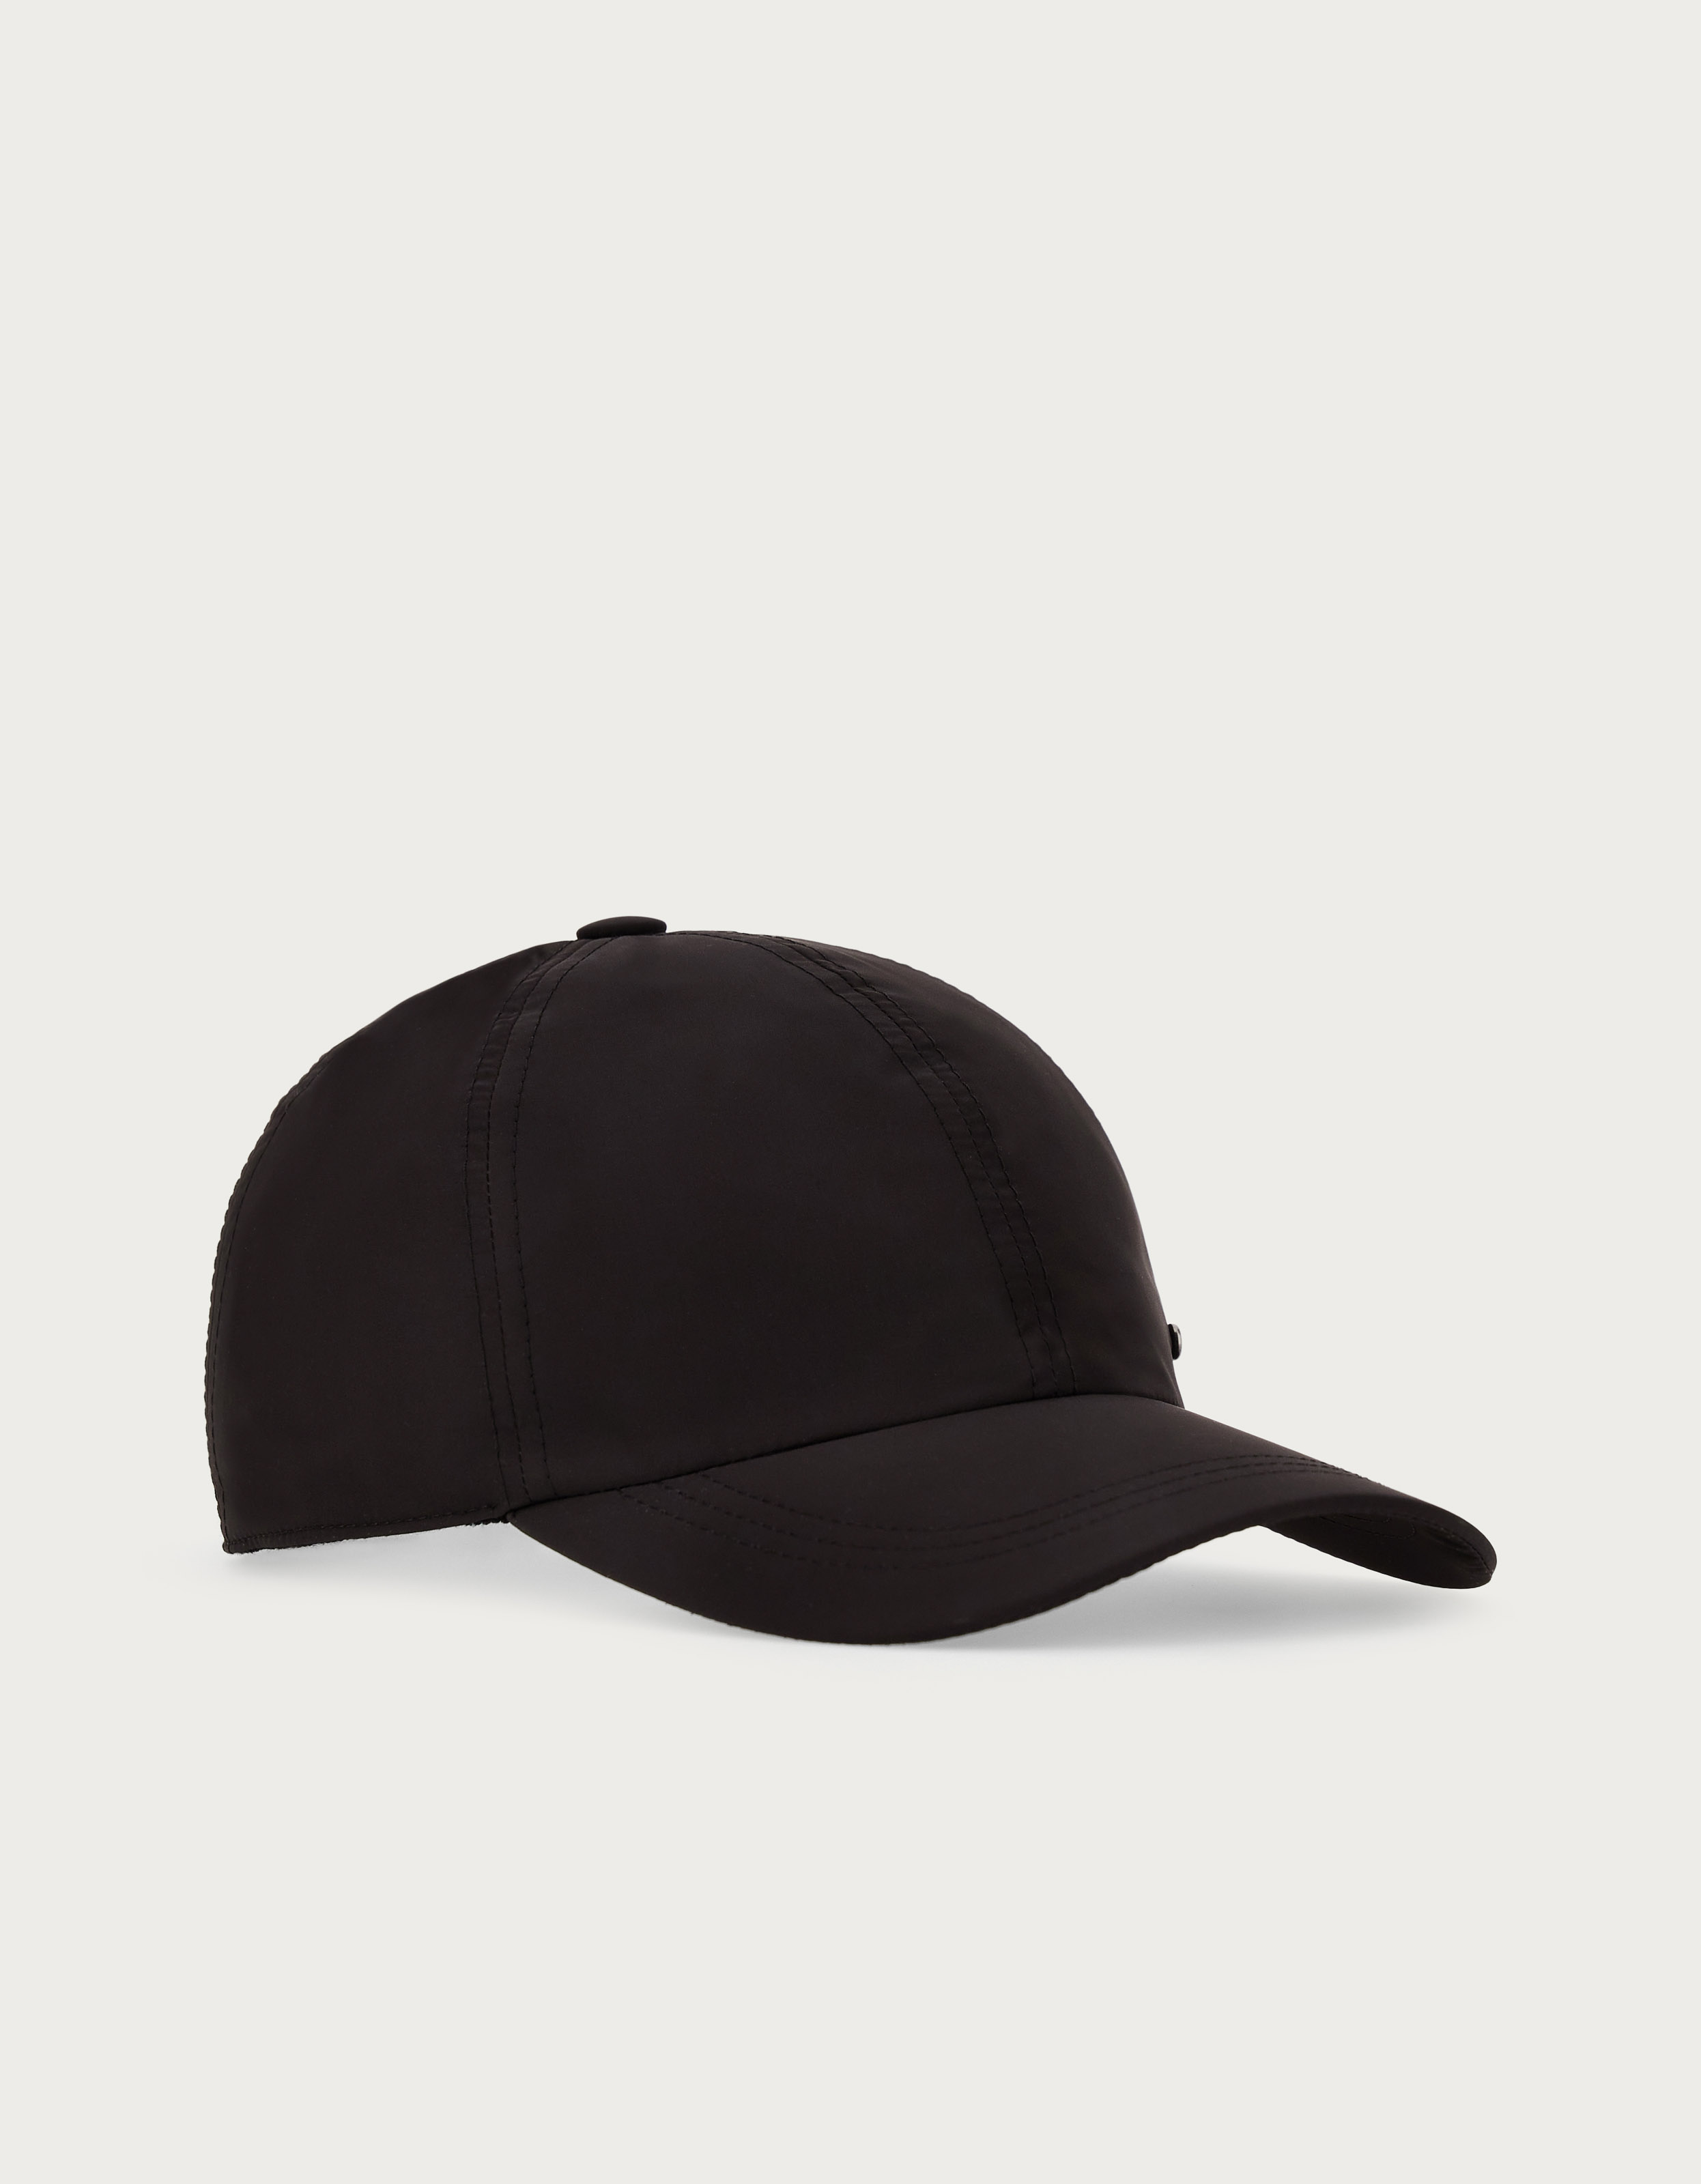 Designer hats, beanies and caps for men - Canali US